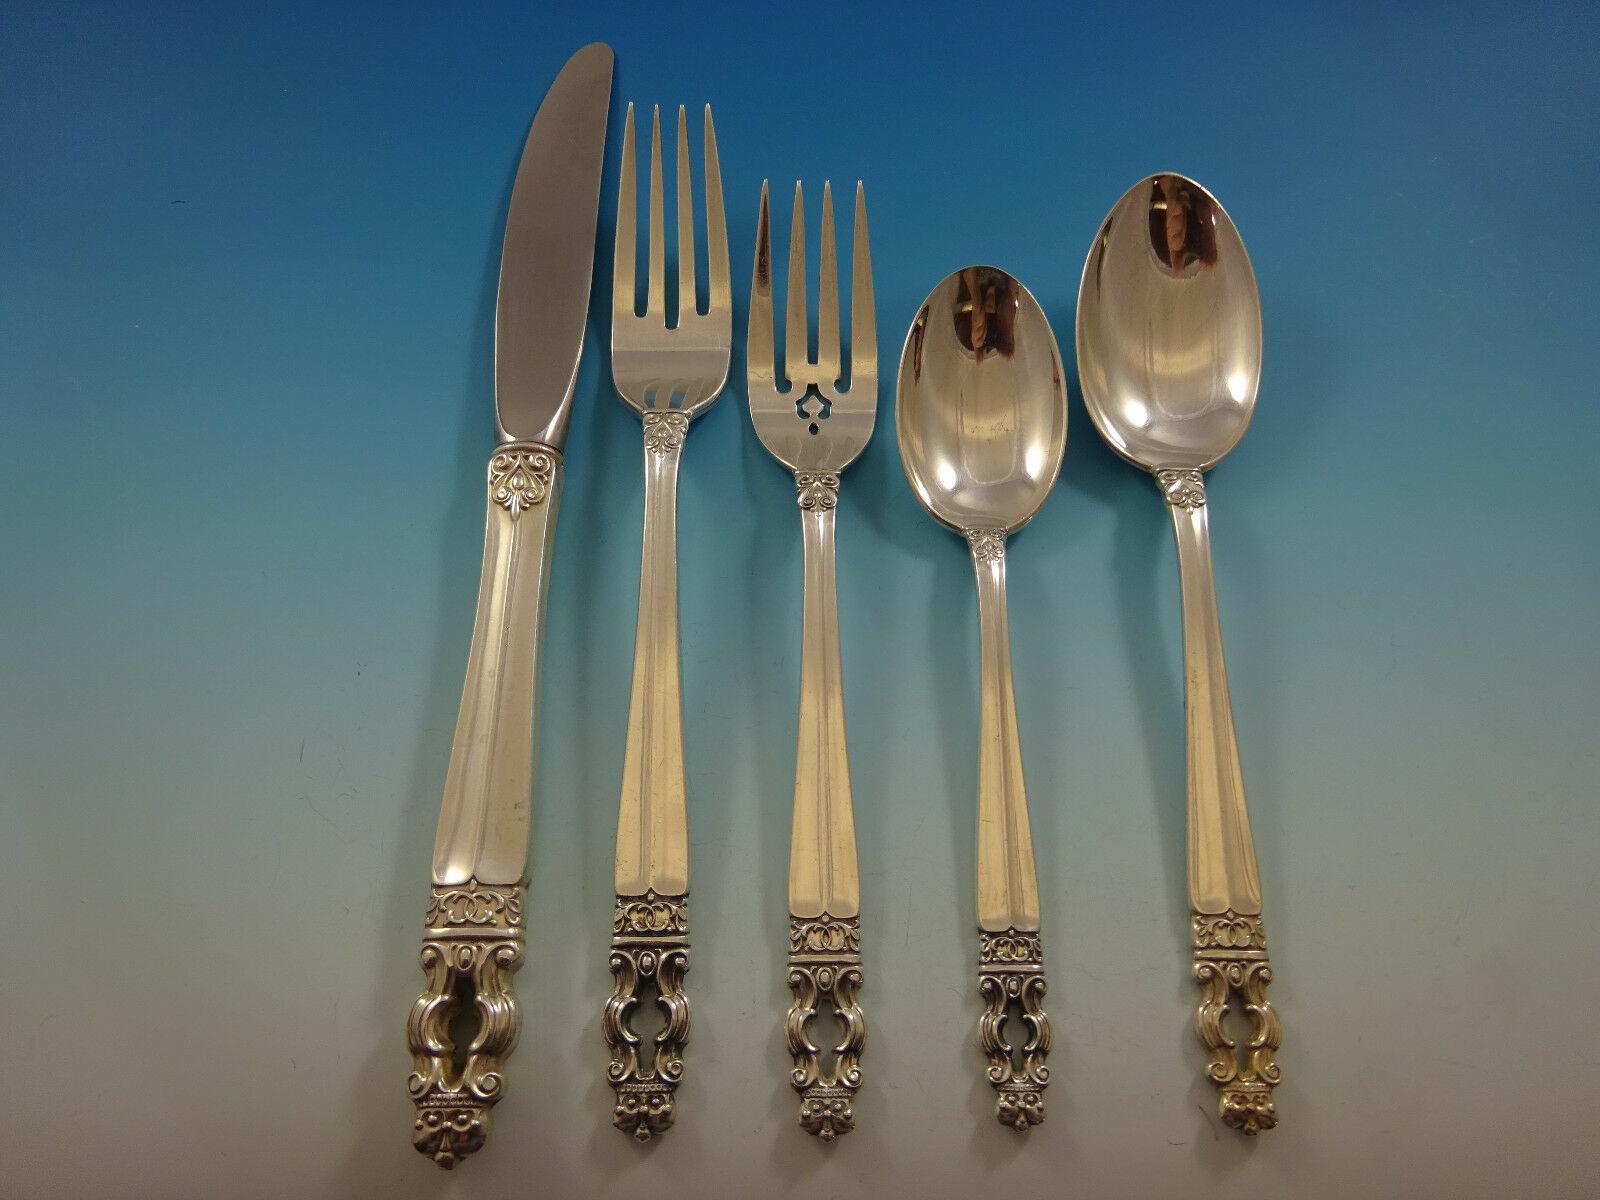 Sovereign Hispana by Gorham sterling silver flatware set - 63 pieces. This set includes:

12 place knives, 9